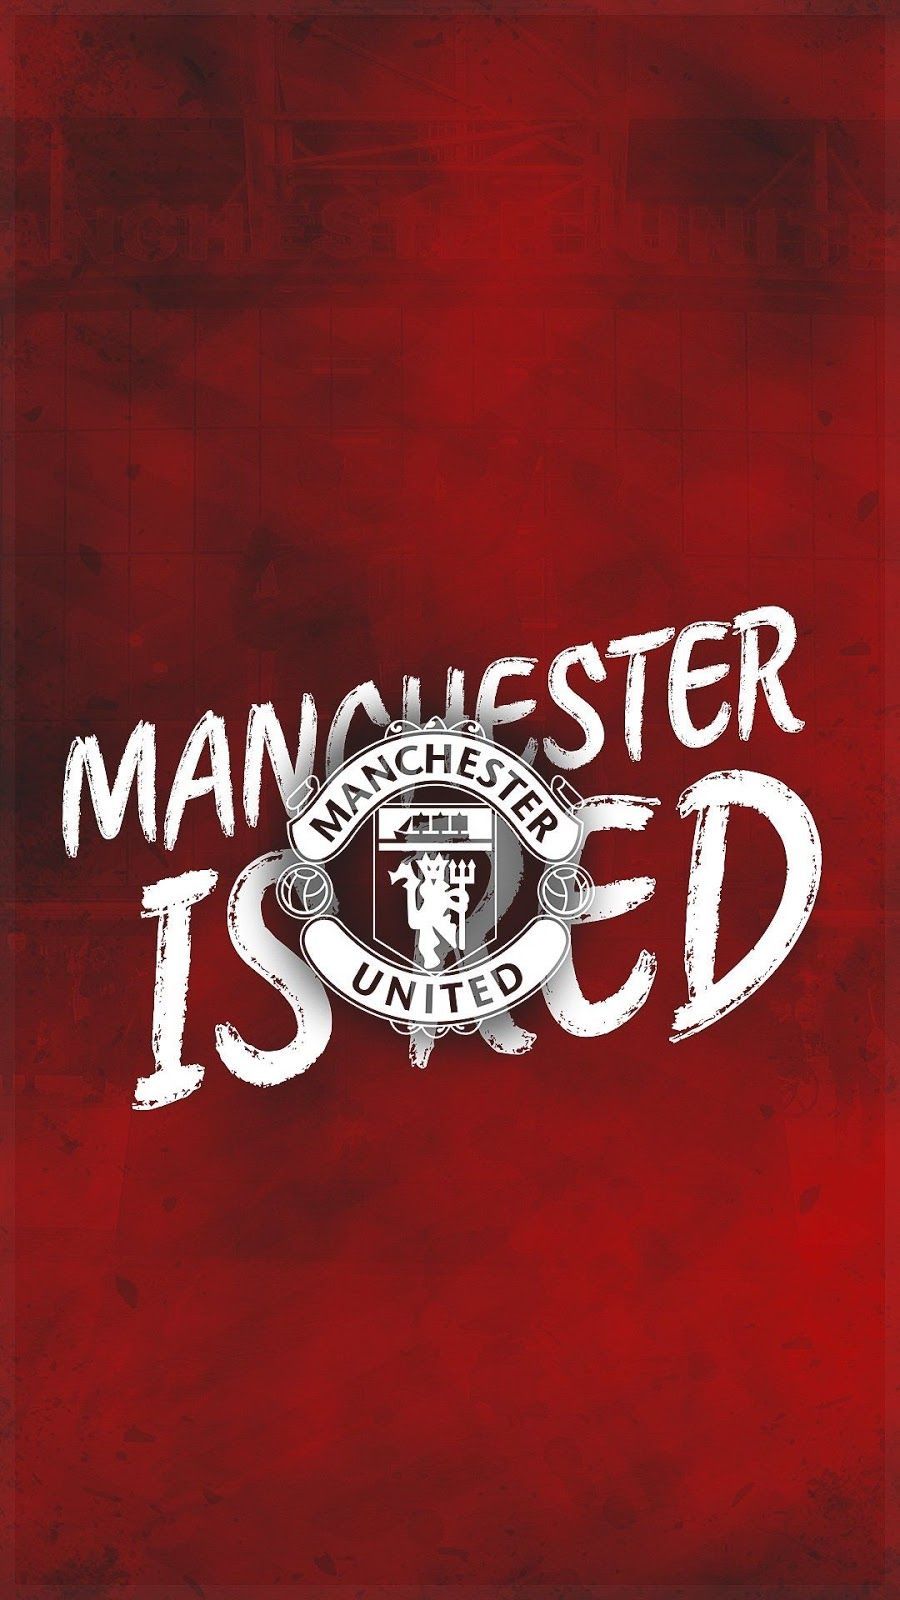 manchester united iphone wallpaper HD. Manchester united wallpaper, Manchester united wallpaper iphone, Manchester united logo